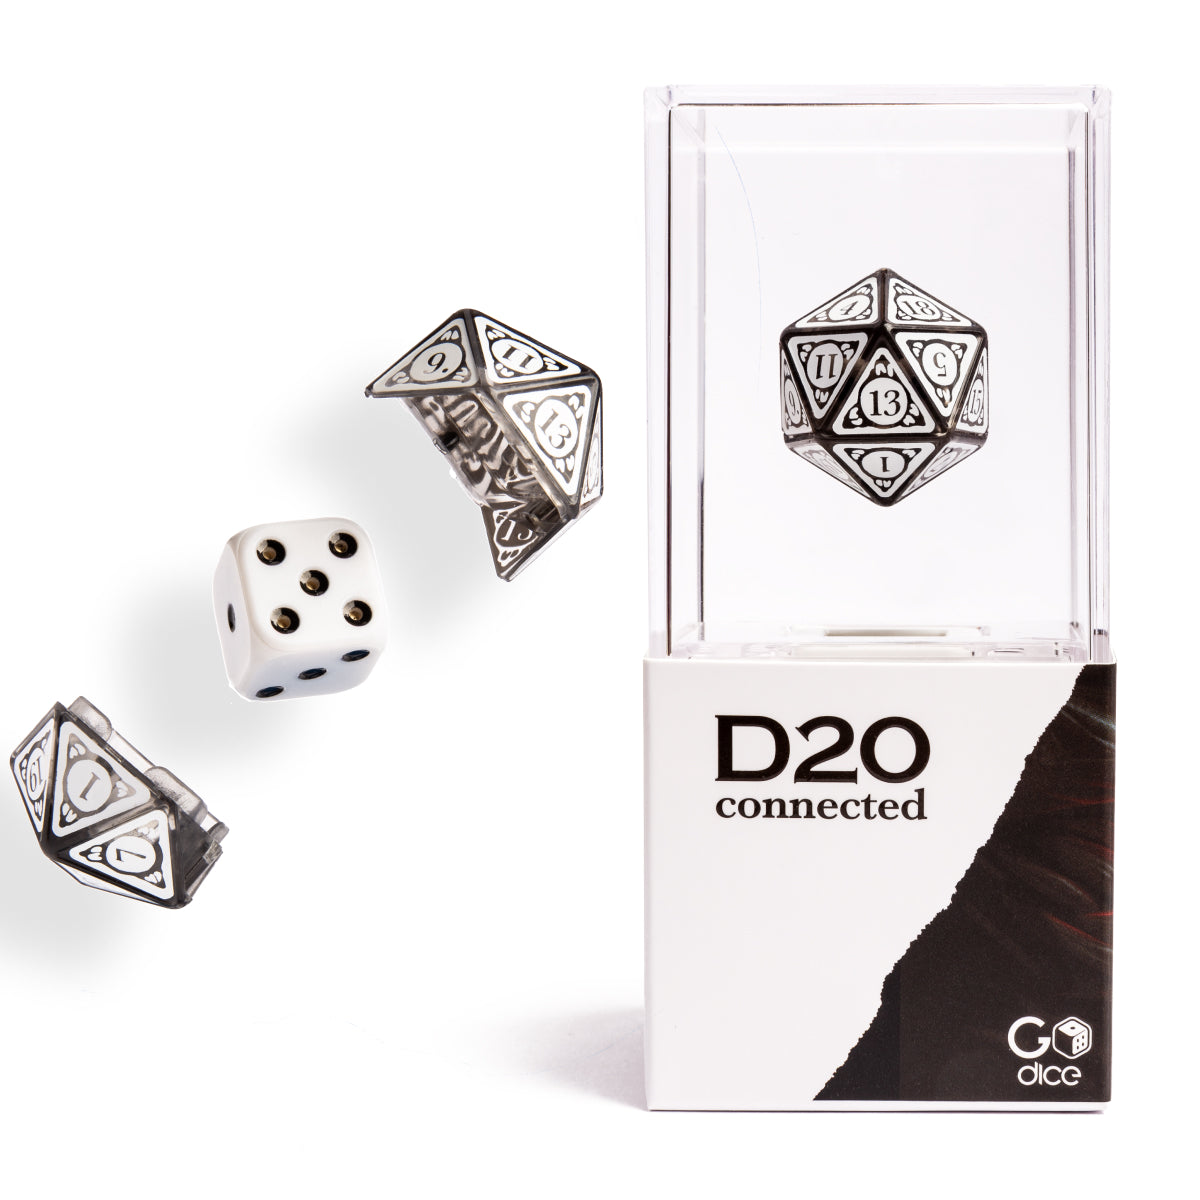 GoDice D20 Connected